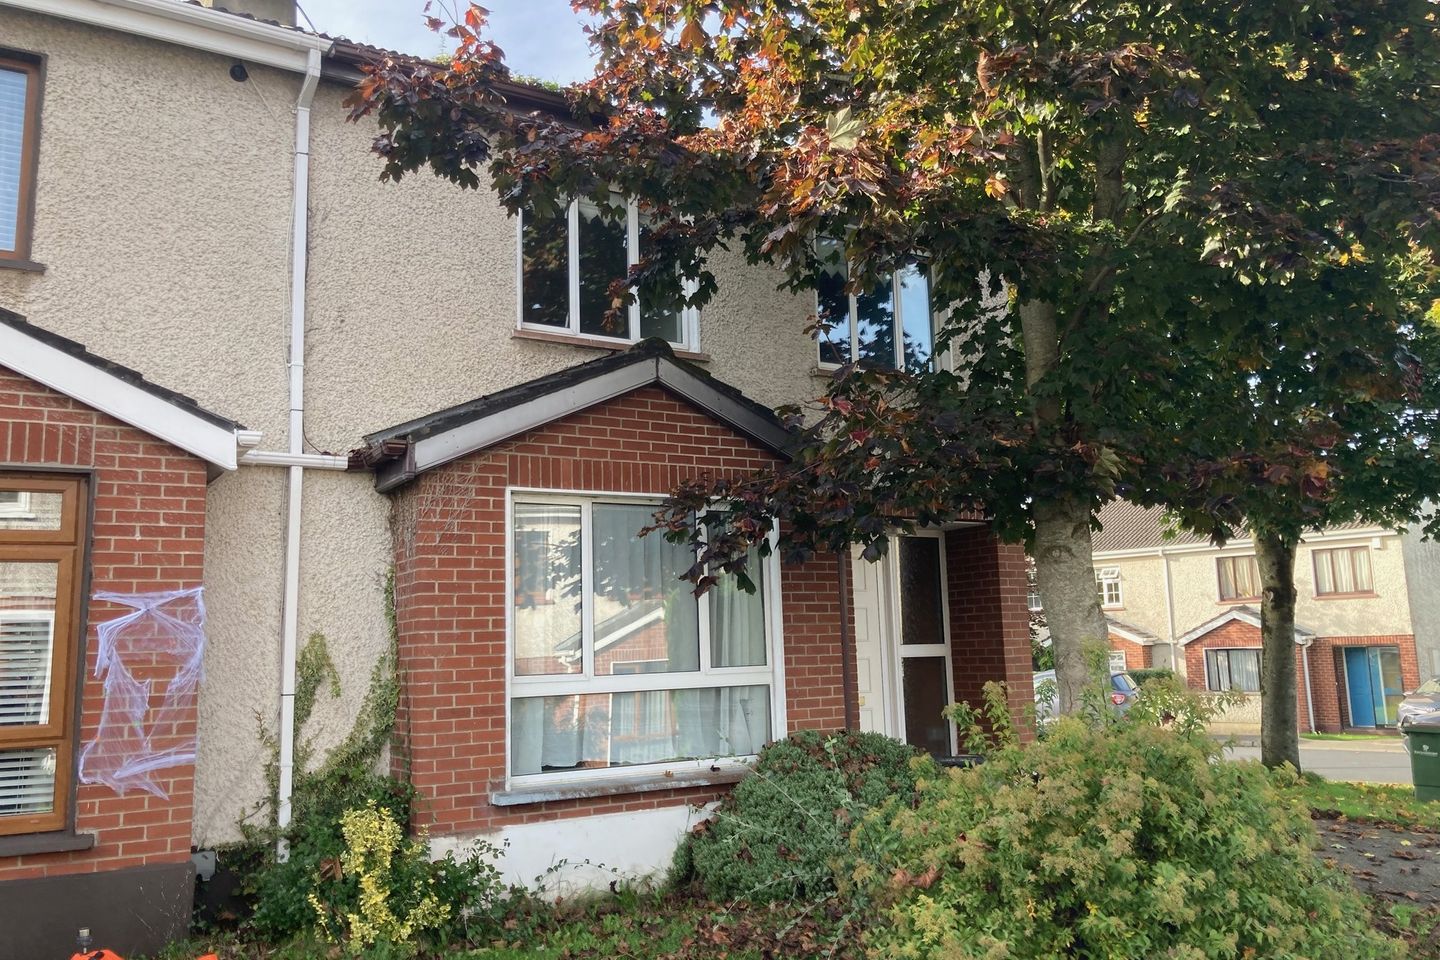 32 Belvedere Lawn, Father Russell Road, Limerick City, Co. Limerick, V94A0FA